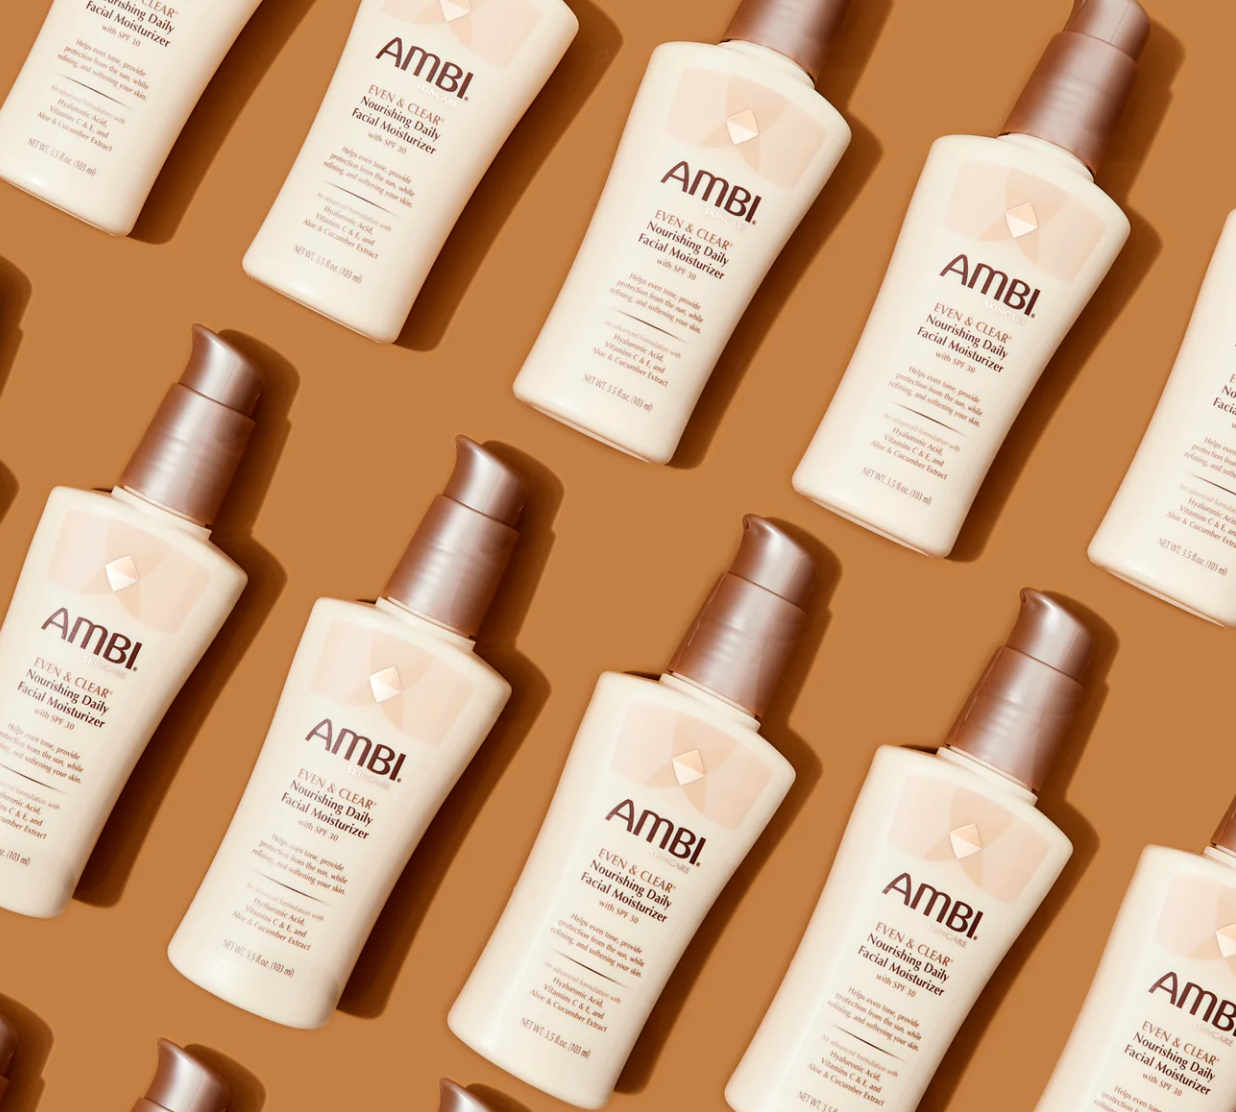 Ambi Launches 'Skin Wisdom' Series To Help Women Of Color Figure Out Best Practices For Healthy, Melanated Skin